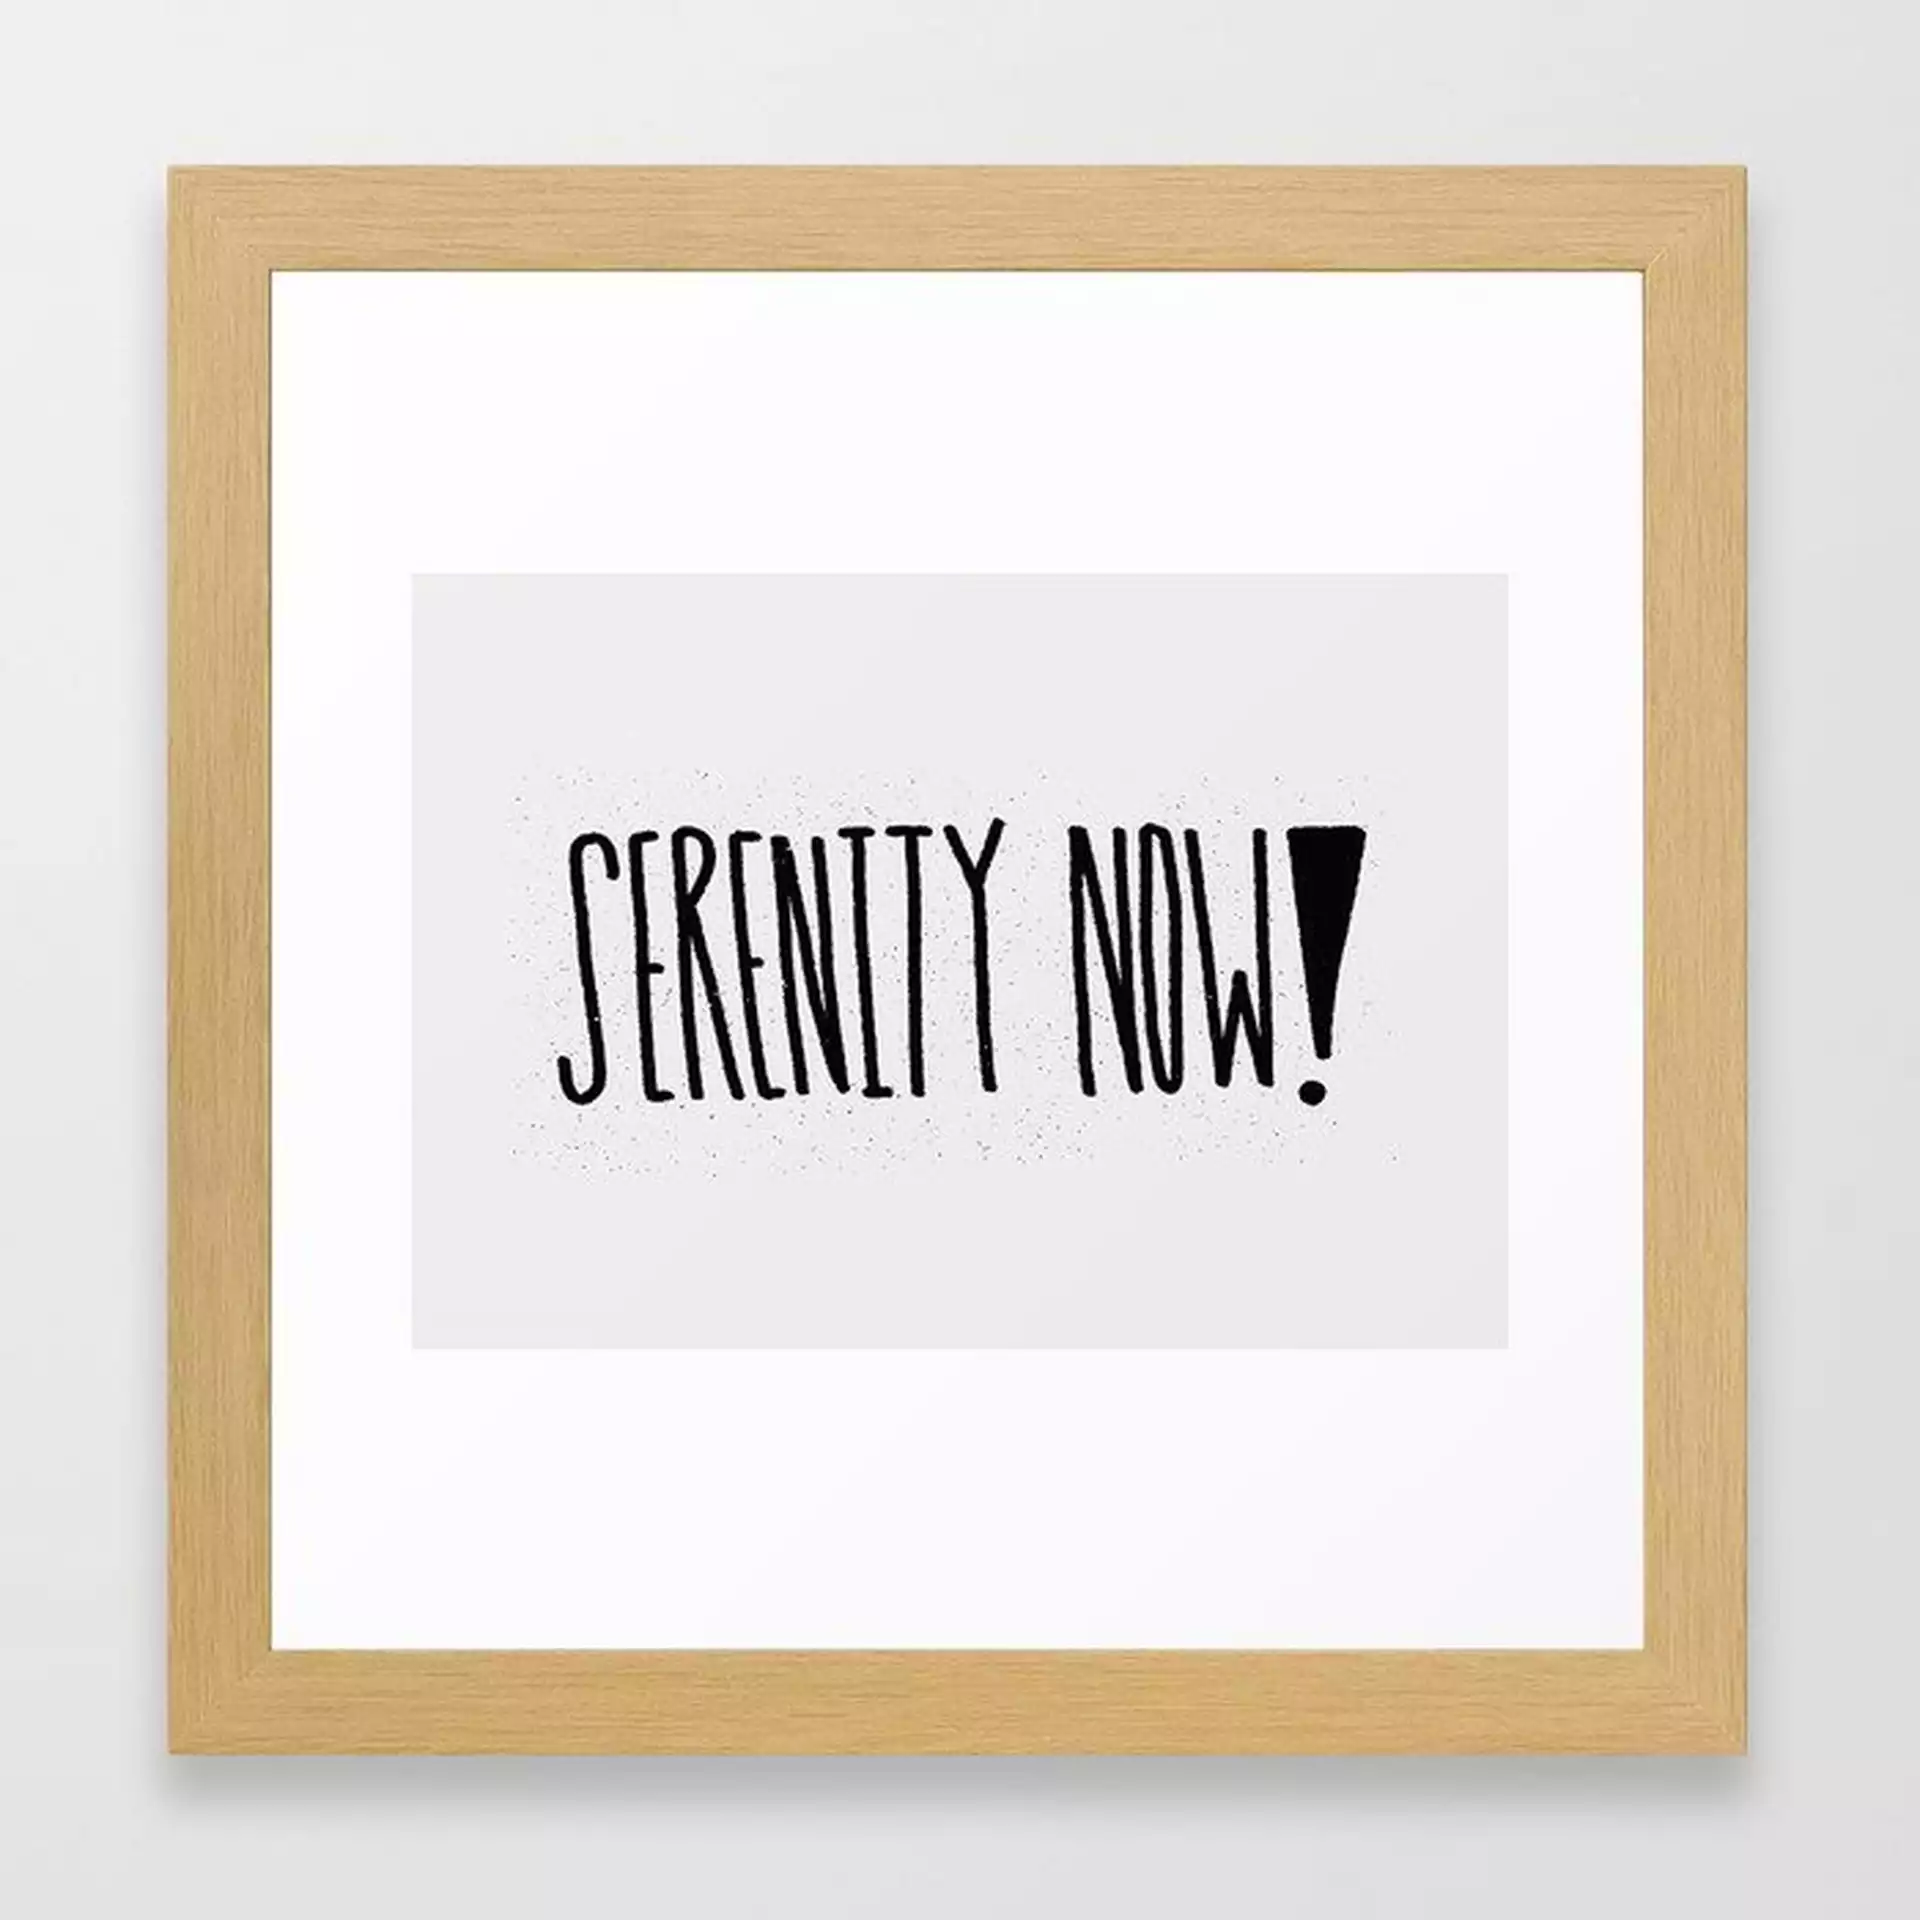 Serenity Now! Framed Art Print by Leah Flores - Conservation Natural - X-Small-12x12